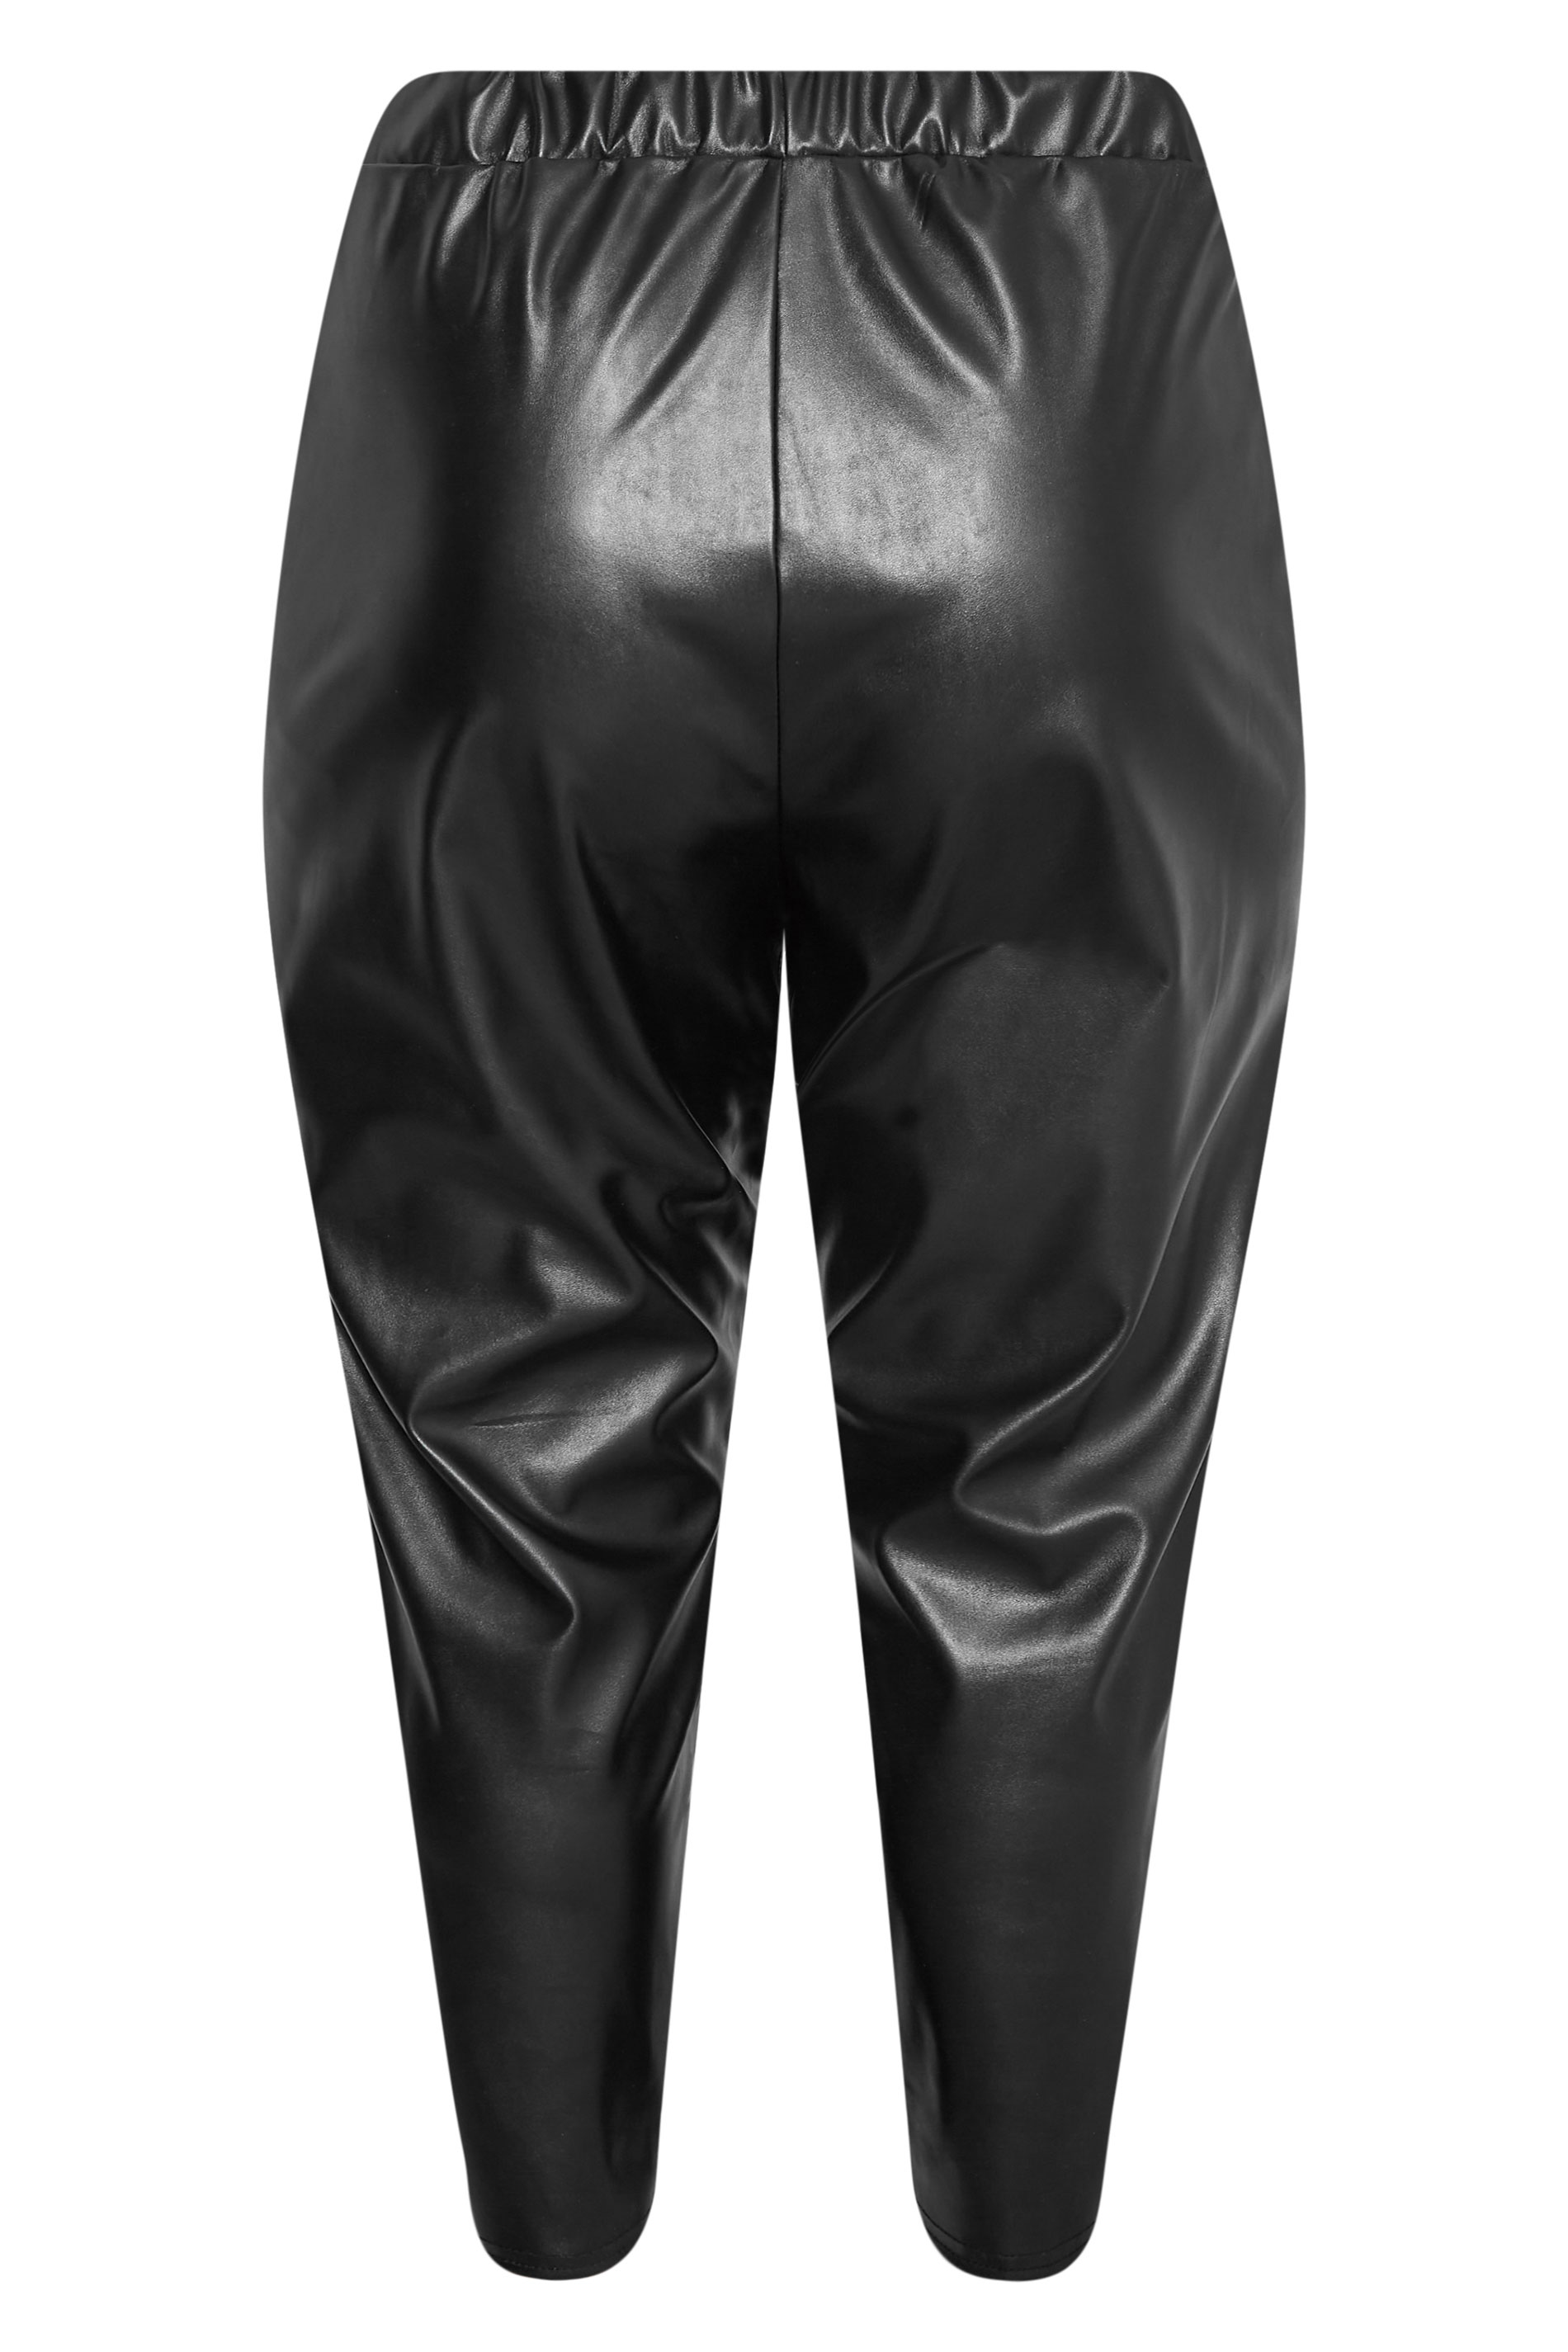 Leather look leggings & wet look trousers – What About This